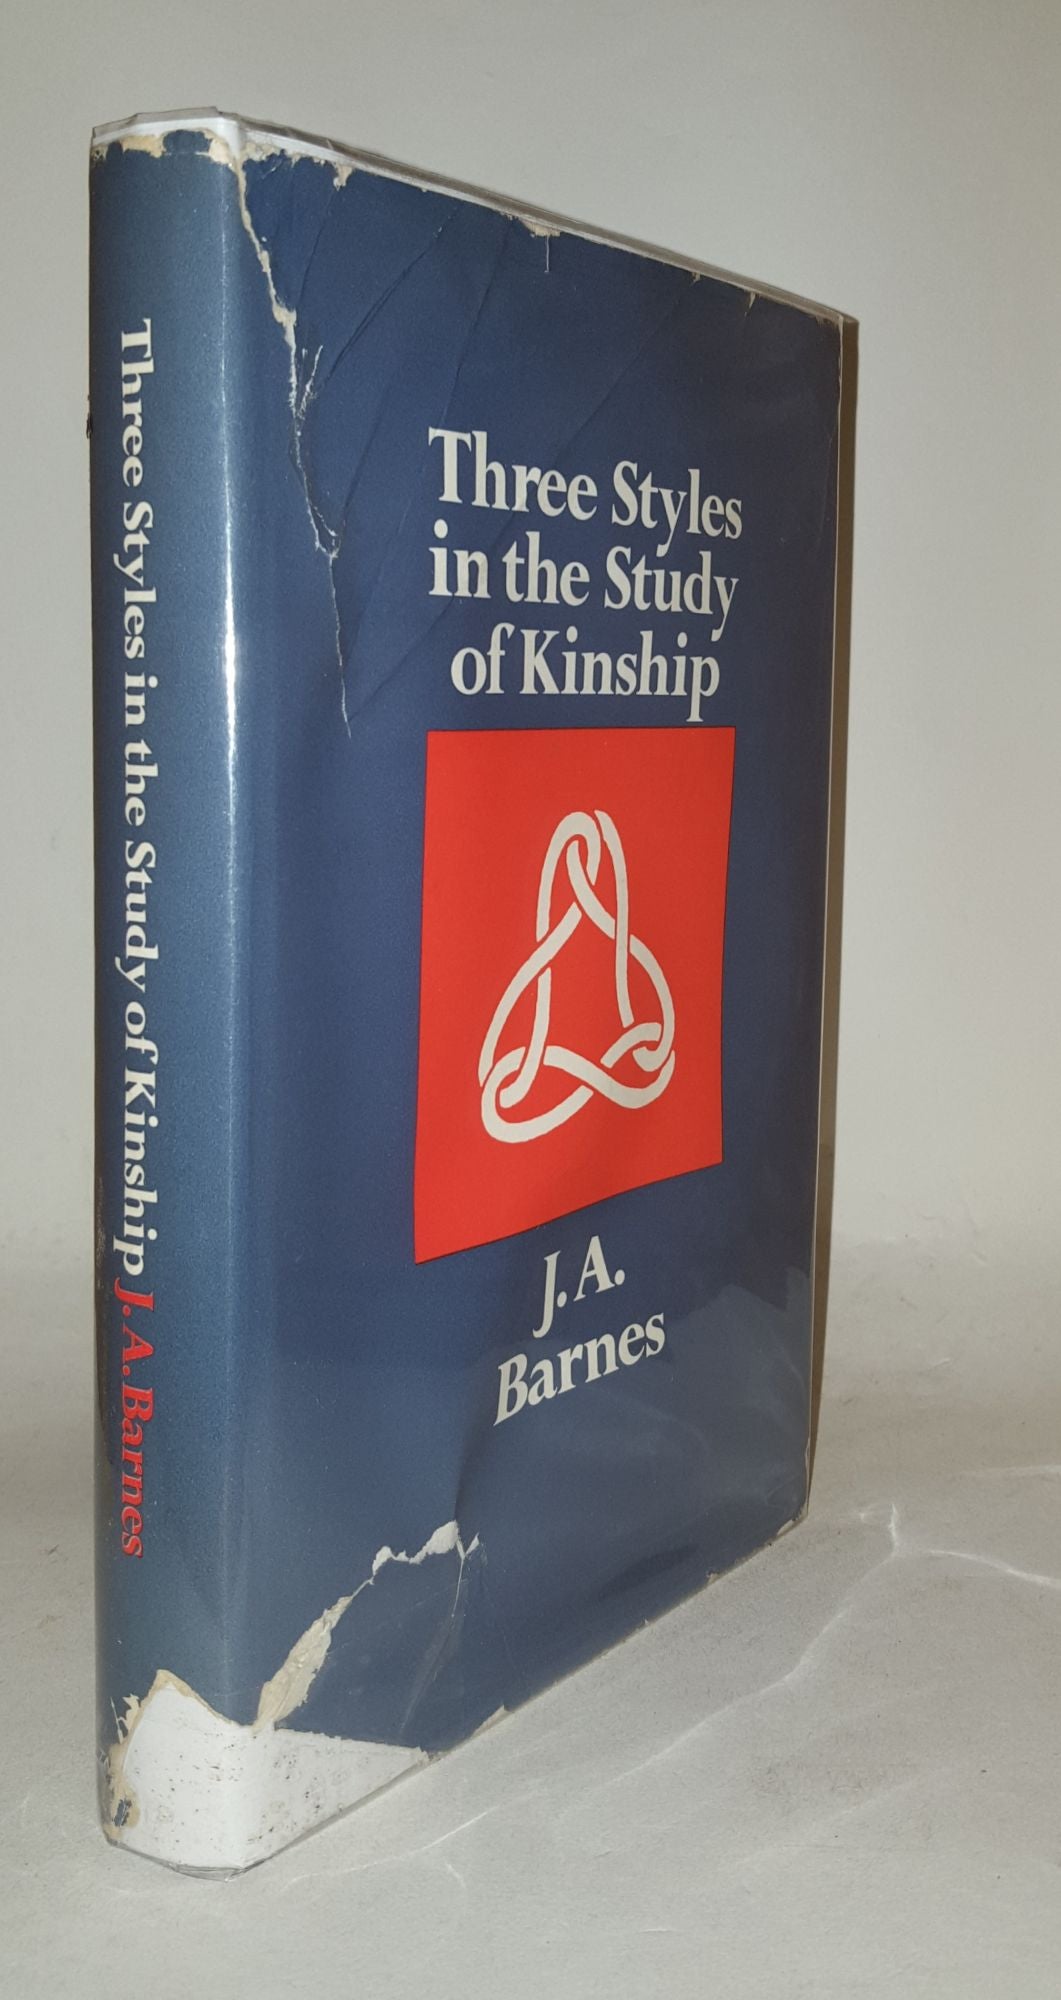 BARNES J.A. - Three Styles in the Study of Kinship